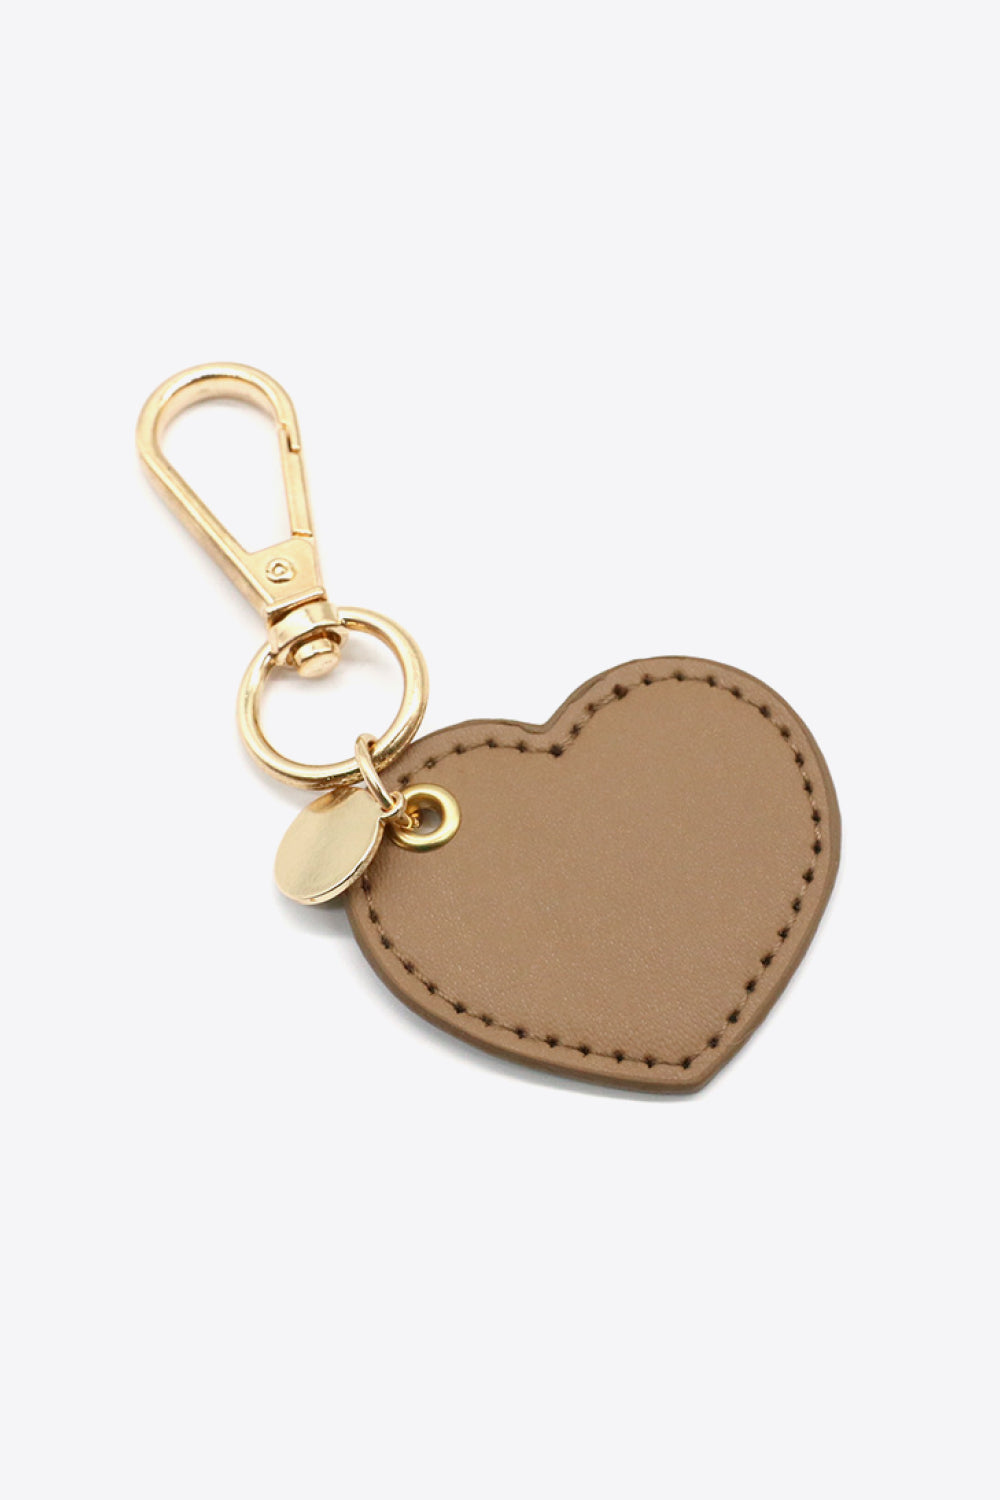 White Smoke Assorted 4-Pack Heart Shape PU Leather Keychain Sentient Beauty Fashions Apparel & Accessories